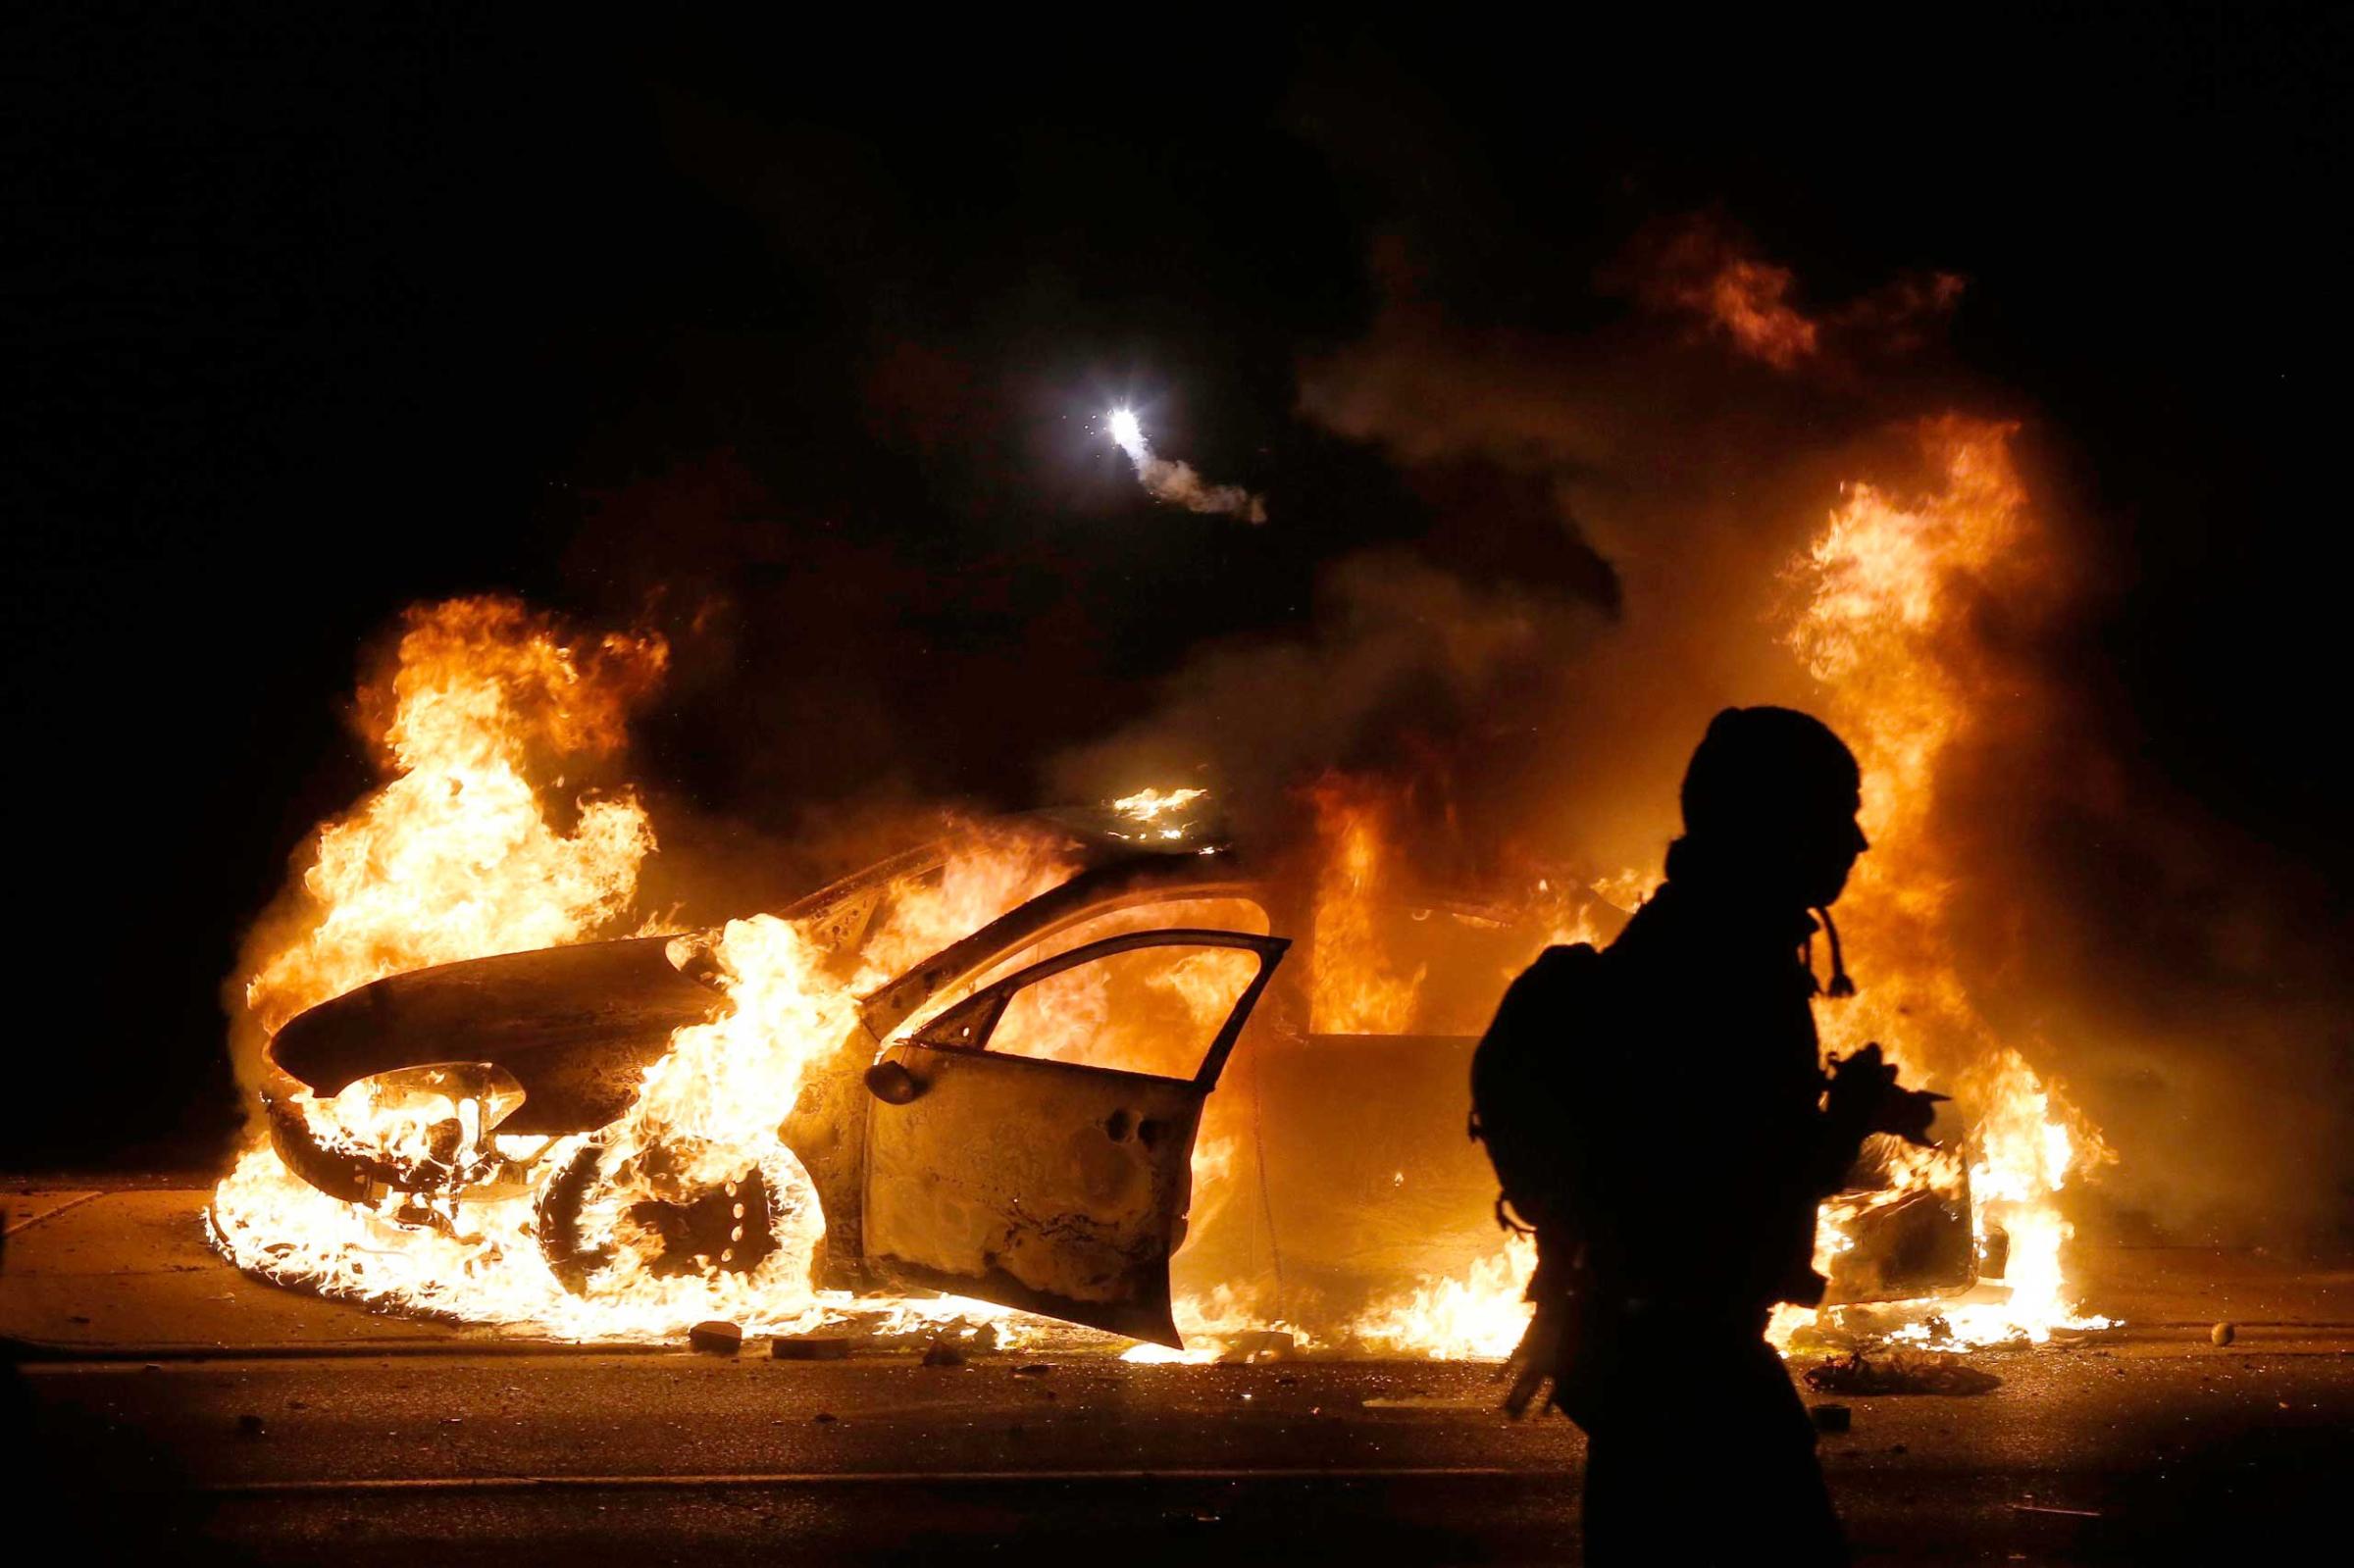 A police car burns on the street after a grand jury returned no indictment in the shooting of Michael Brown in Ferguson, Missouri